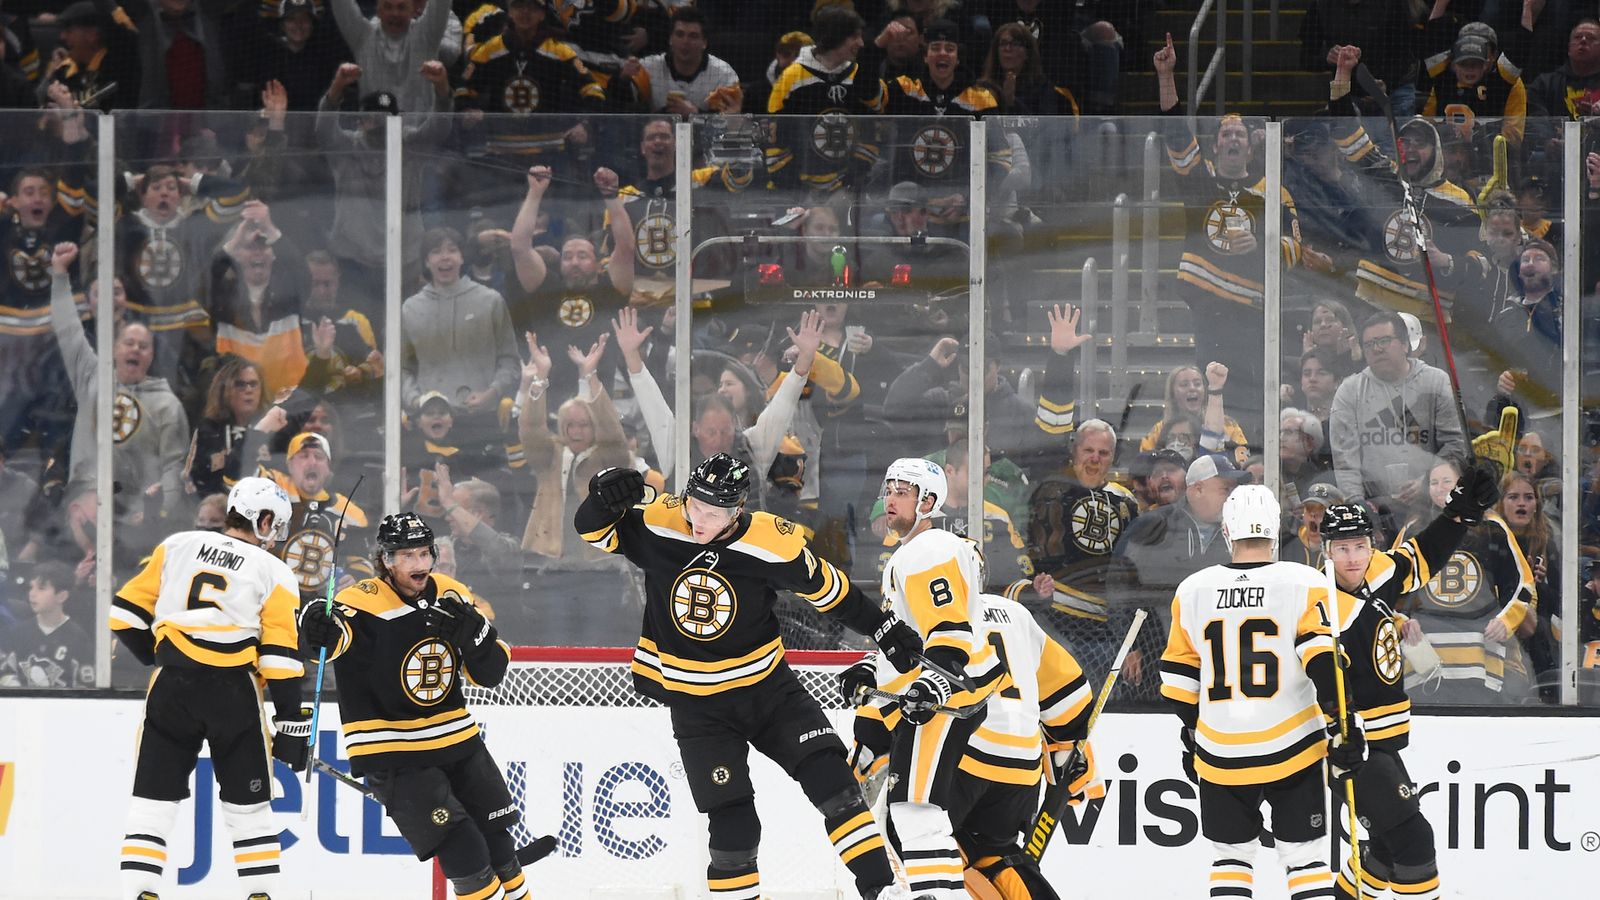 Live updates: Bruins come back for 2-1 victory over the Penguins